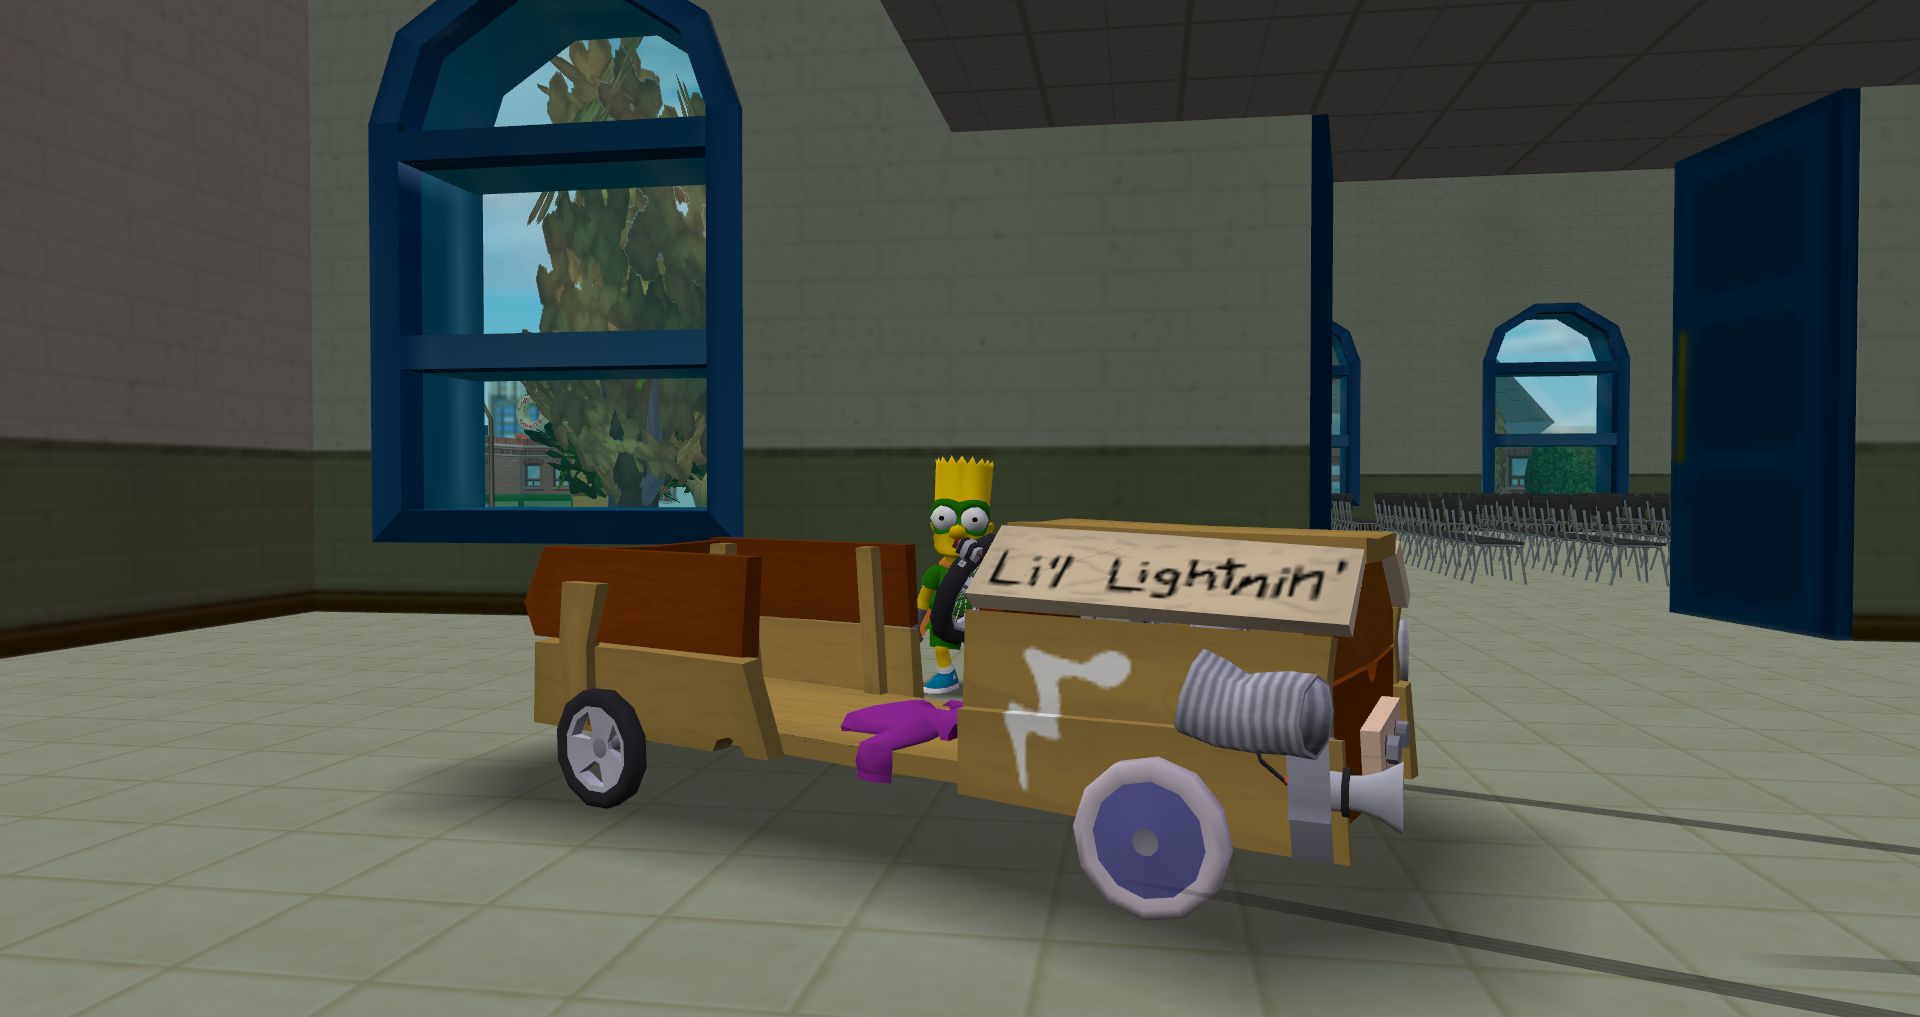 Bart probably shouldn't be driving this inside...